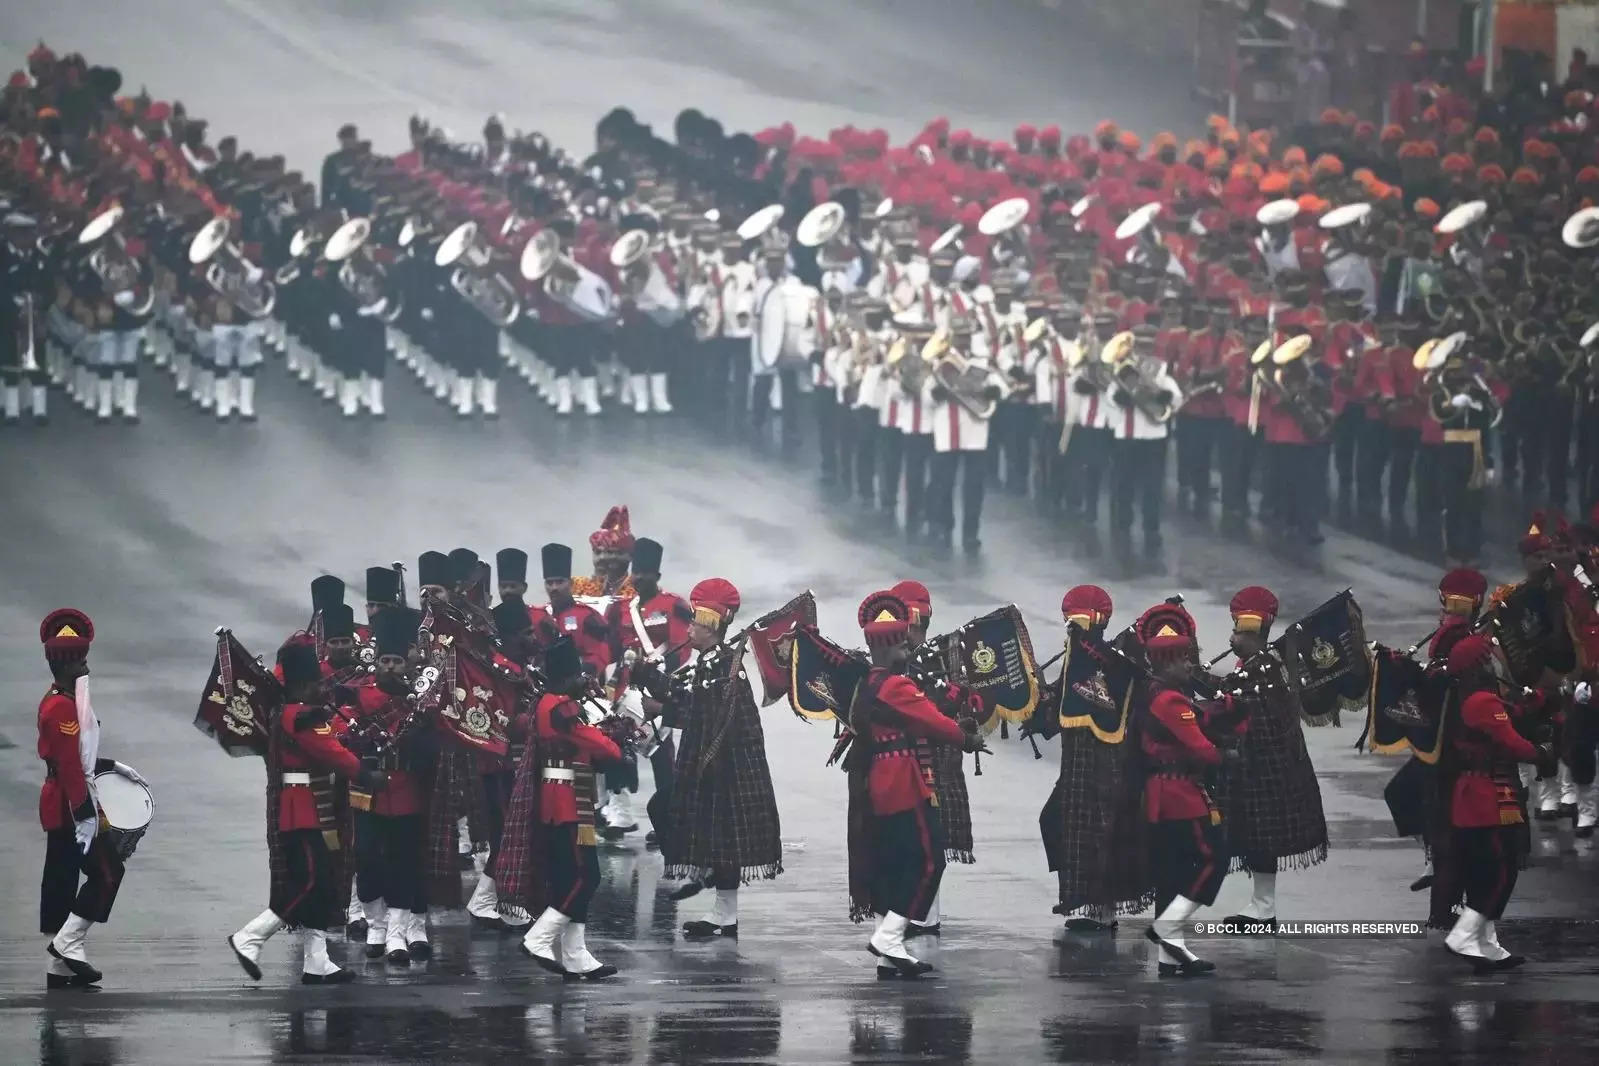 Republic Day celebrations come to a musical end with Beating Retreat ceremony